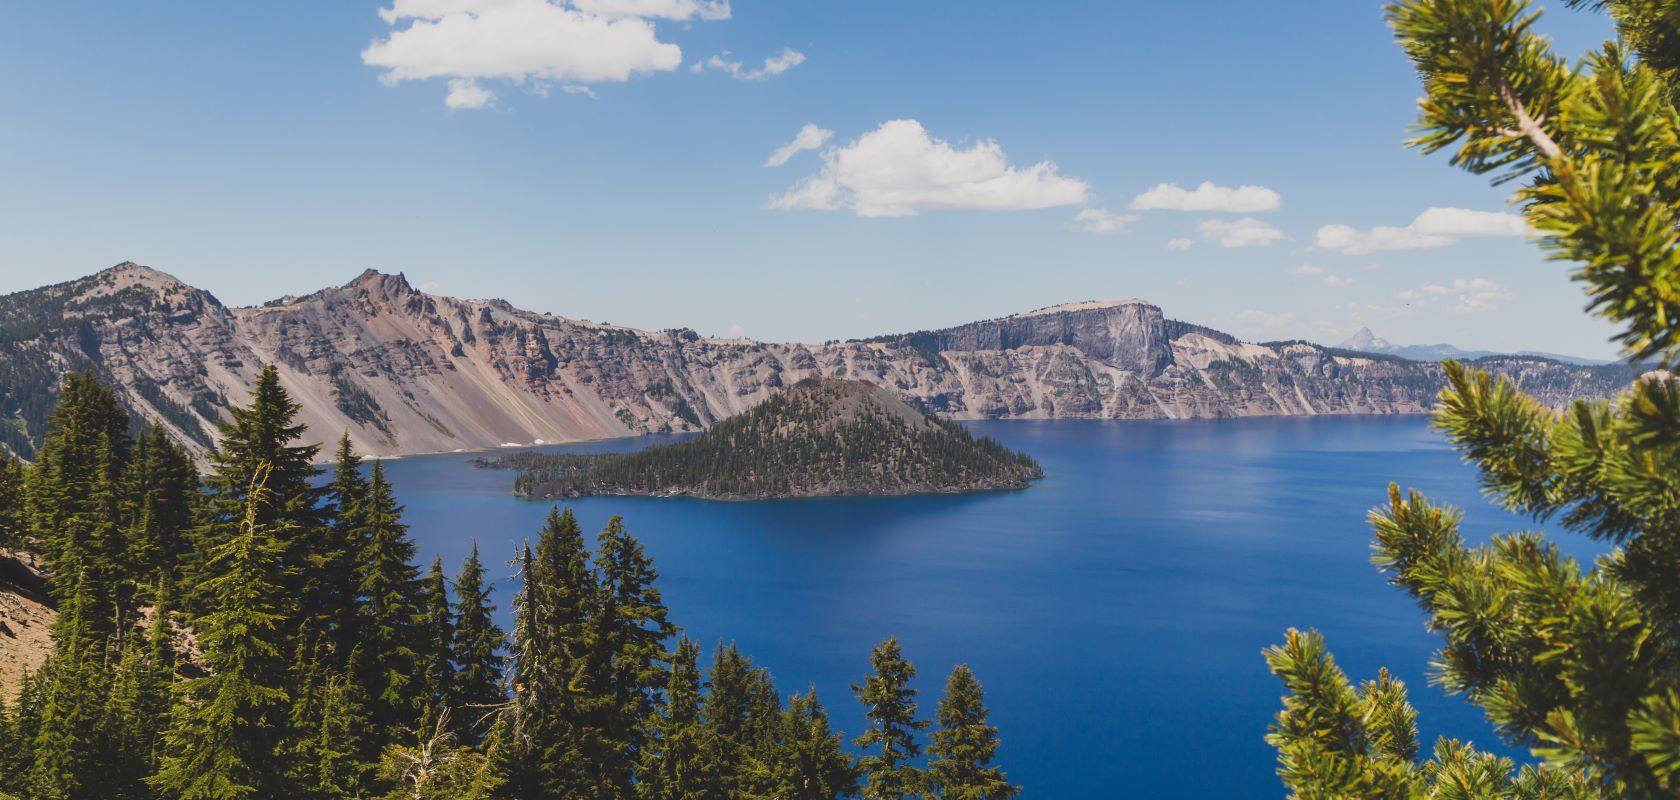 A View Of Crater Lake National Park Surrounded By Forest